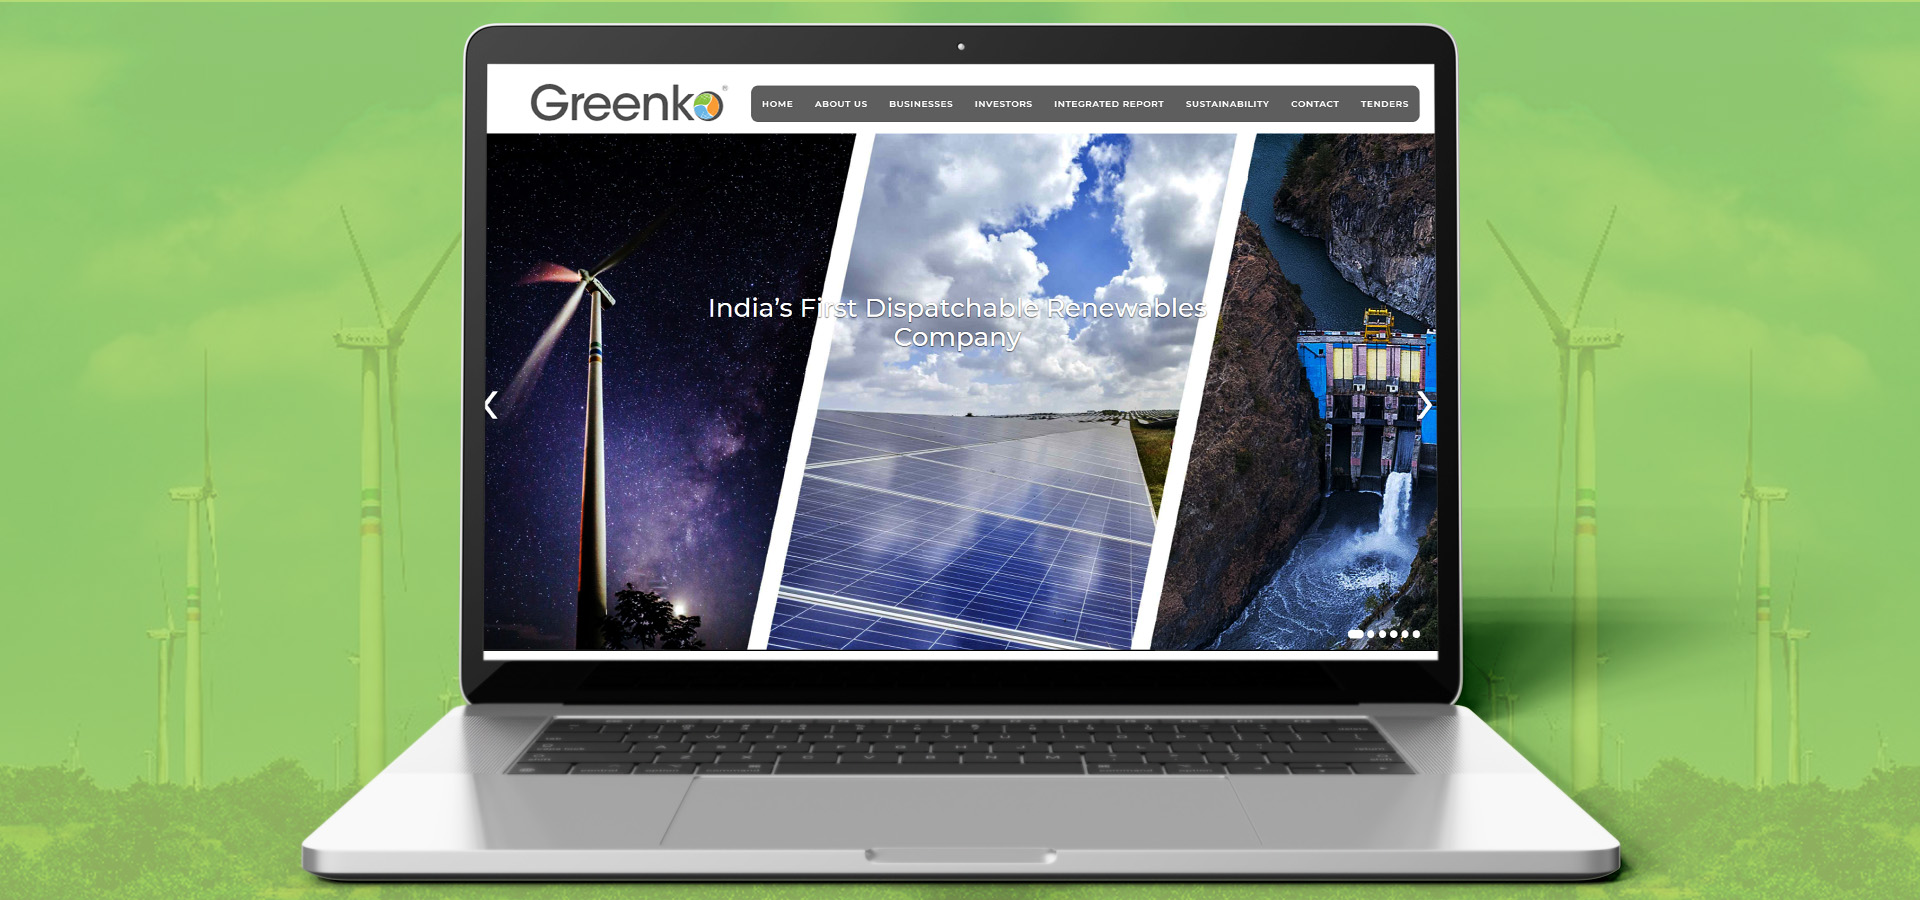 This is how Greenko is building India’s largest operational clean energy portfolio.